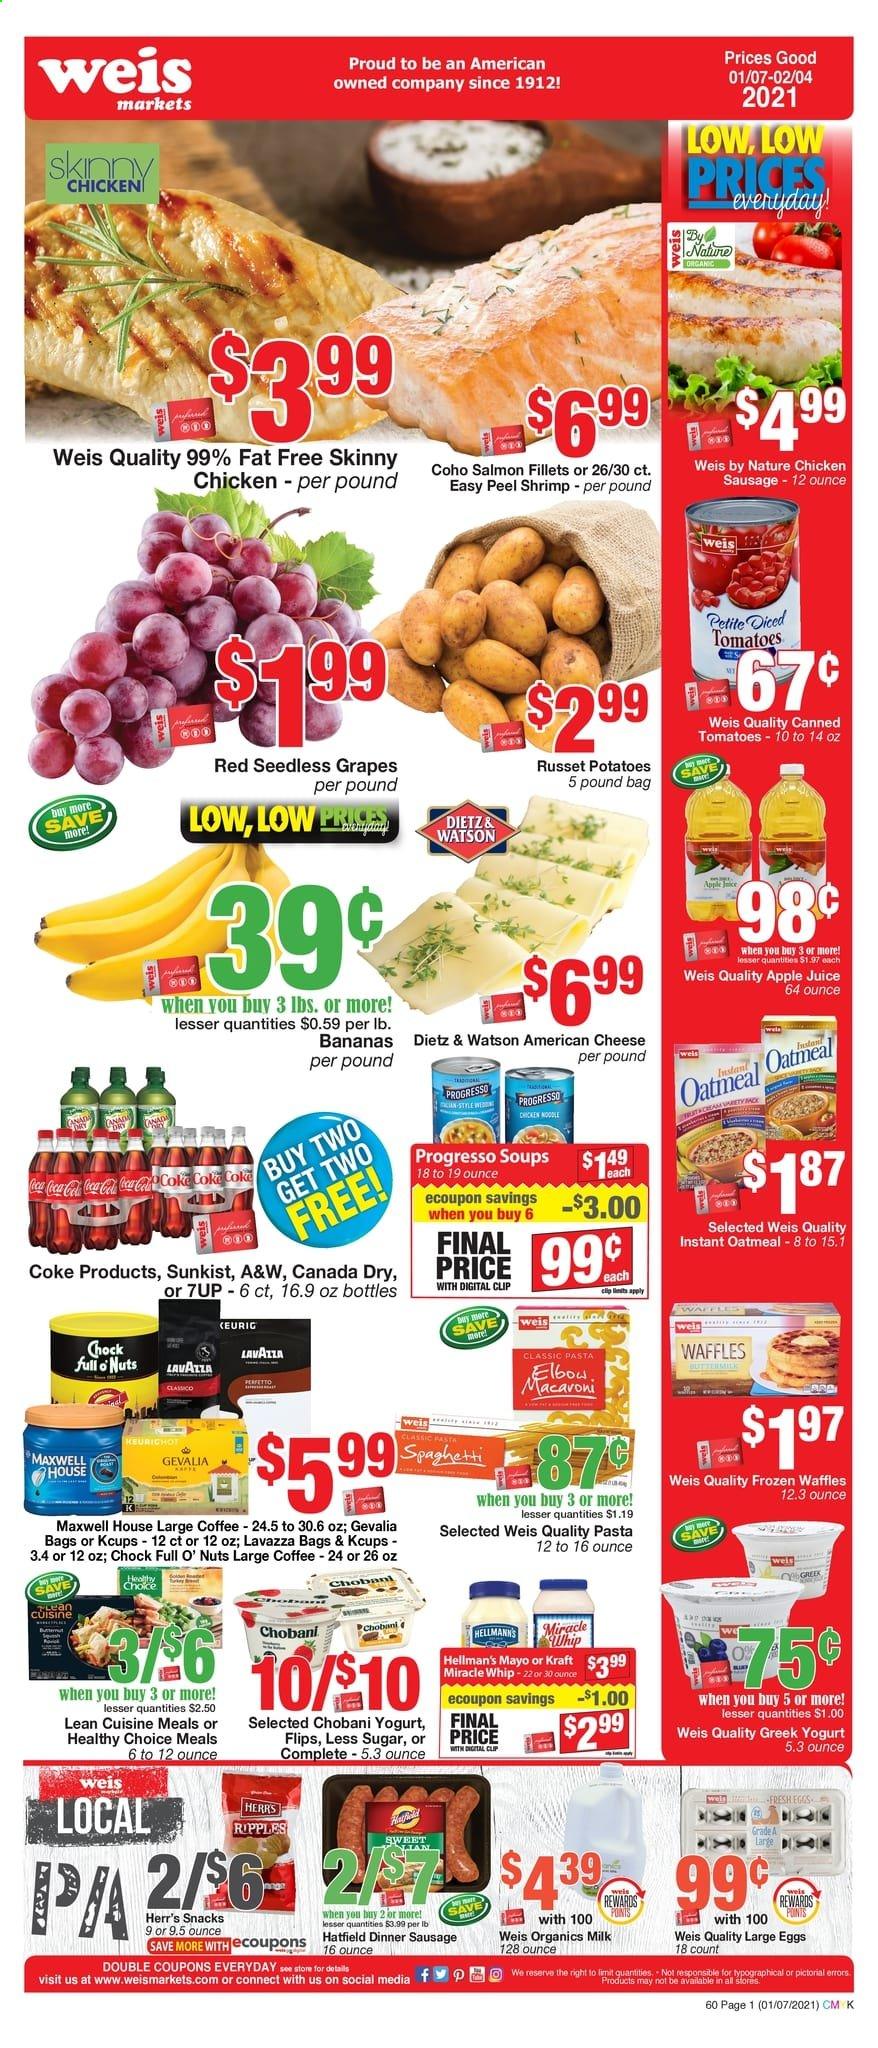 thumbnail - Weis Flyer - 01/07/2021 - 02/04/2021 - Sales products - seedless grapes, waffles, bananas, salmon, salmon fillet, shrimps, Progresso, Lean Cuisine, Healthy Choice, Kraft®, Dietz & Watson, sausage, chicken sausage, american cheese, cheese, yoghurt, Chobani, large eggs, mayonnaise, Miracle Whip, snack, oatmeal, pasta, noodles, apple juice, Canada Dry, Coca-Cola, juice, 7UP, A&W, Maxwell House, coffee, Gevalia, Lavazza, grapes. Page 1.